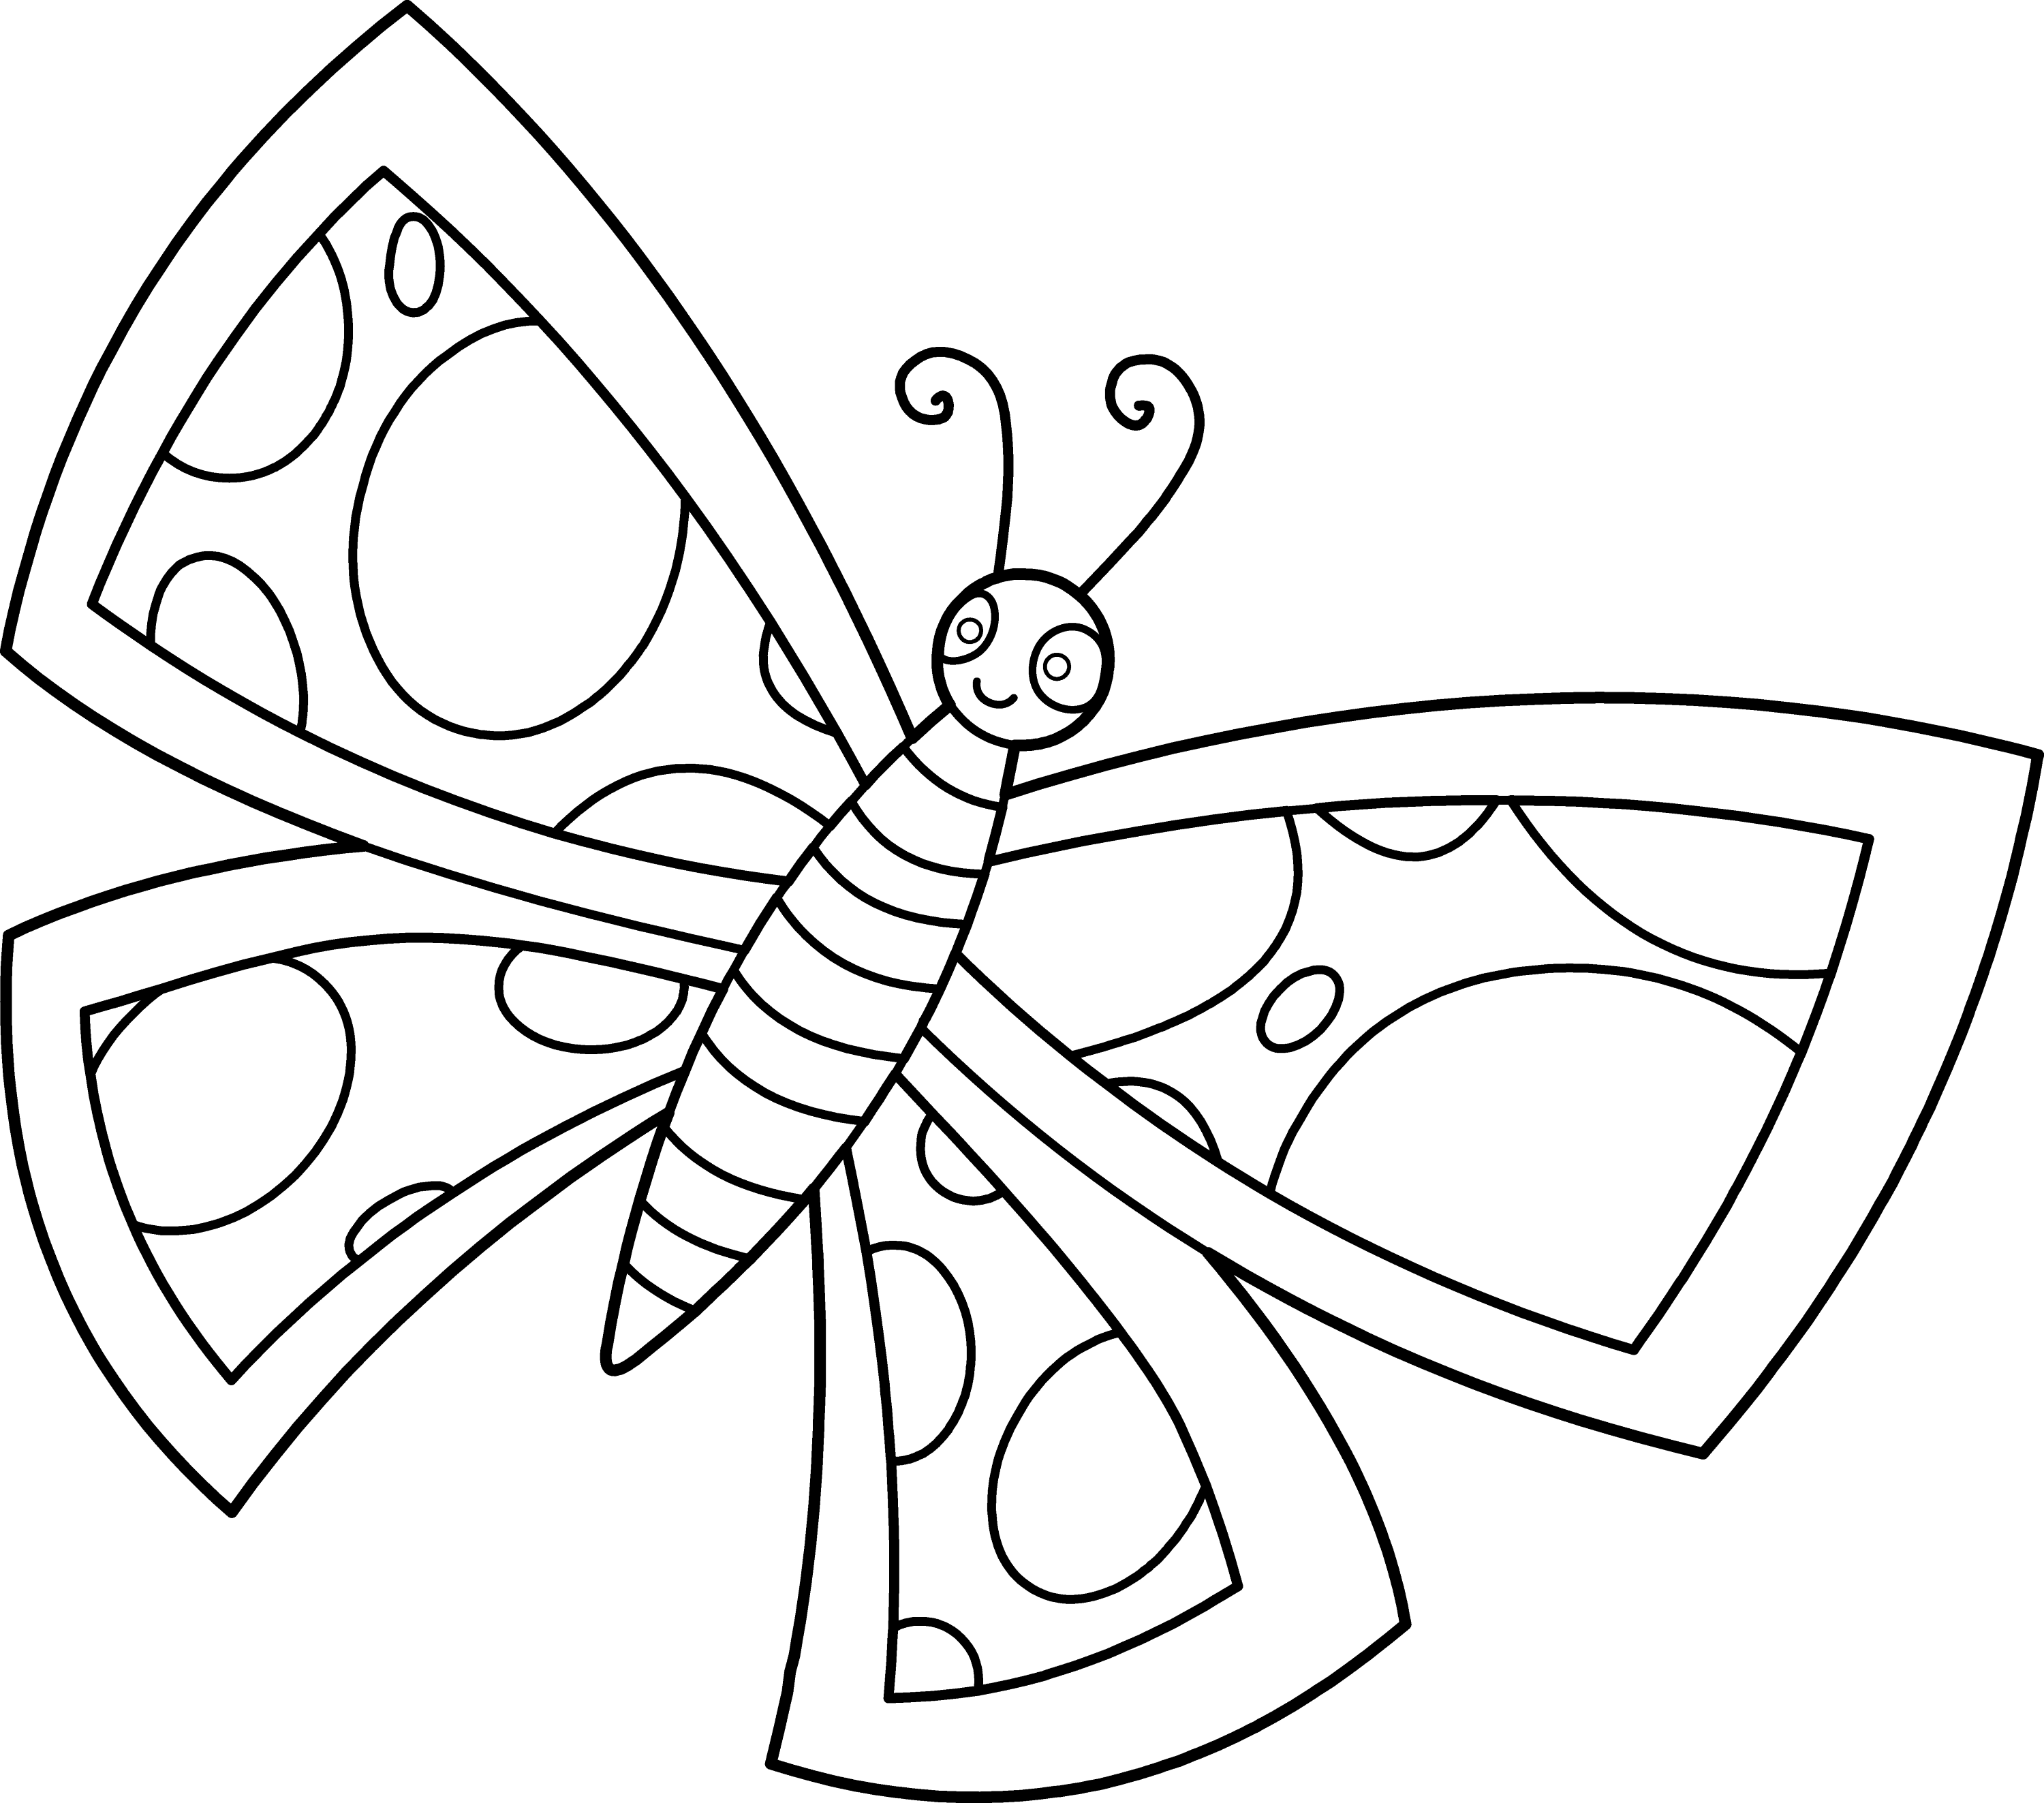 free black and white clipart of butterflies - photo #34